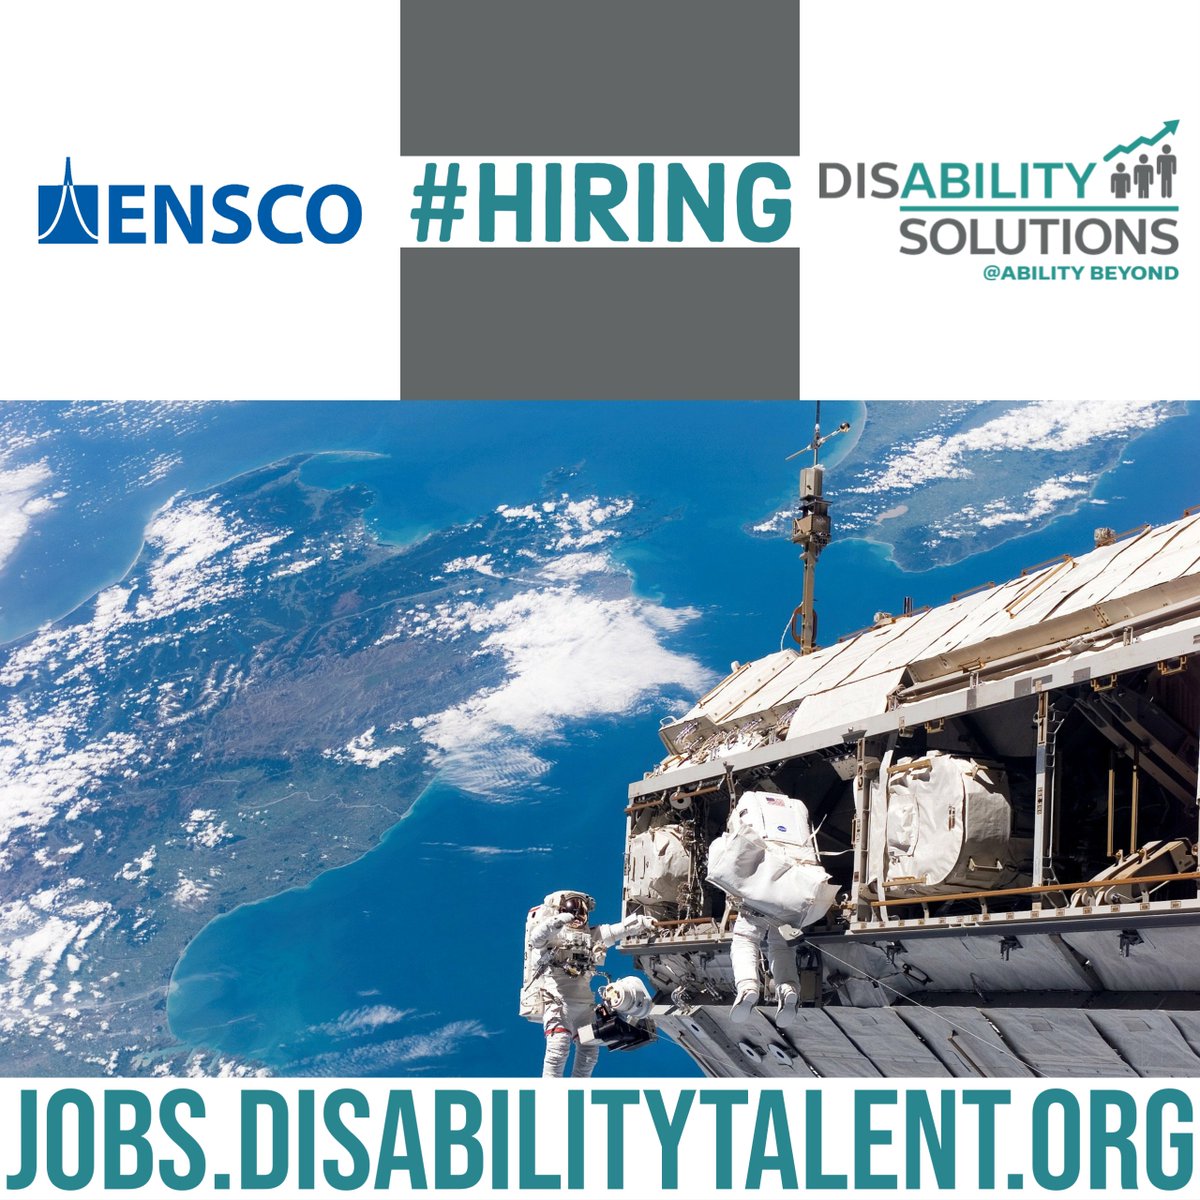 @ENSCO_Inc is hiring!
Visit the @DSTalentatWork Career Center here hubs.la/Q01Twb660

Sign up for a free account and have alerts sent to you notifying of new jobs in your area here:hubs.la/Q01TwnBj0

#Hiring #Disability #DisabilityEmployment #EmploymentOpportunities